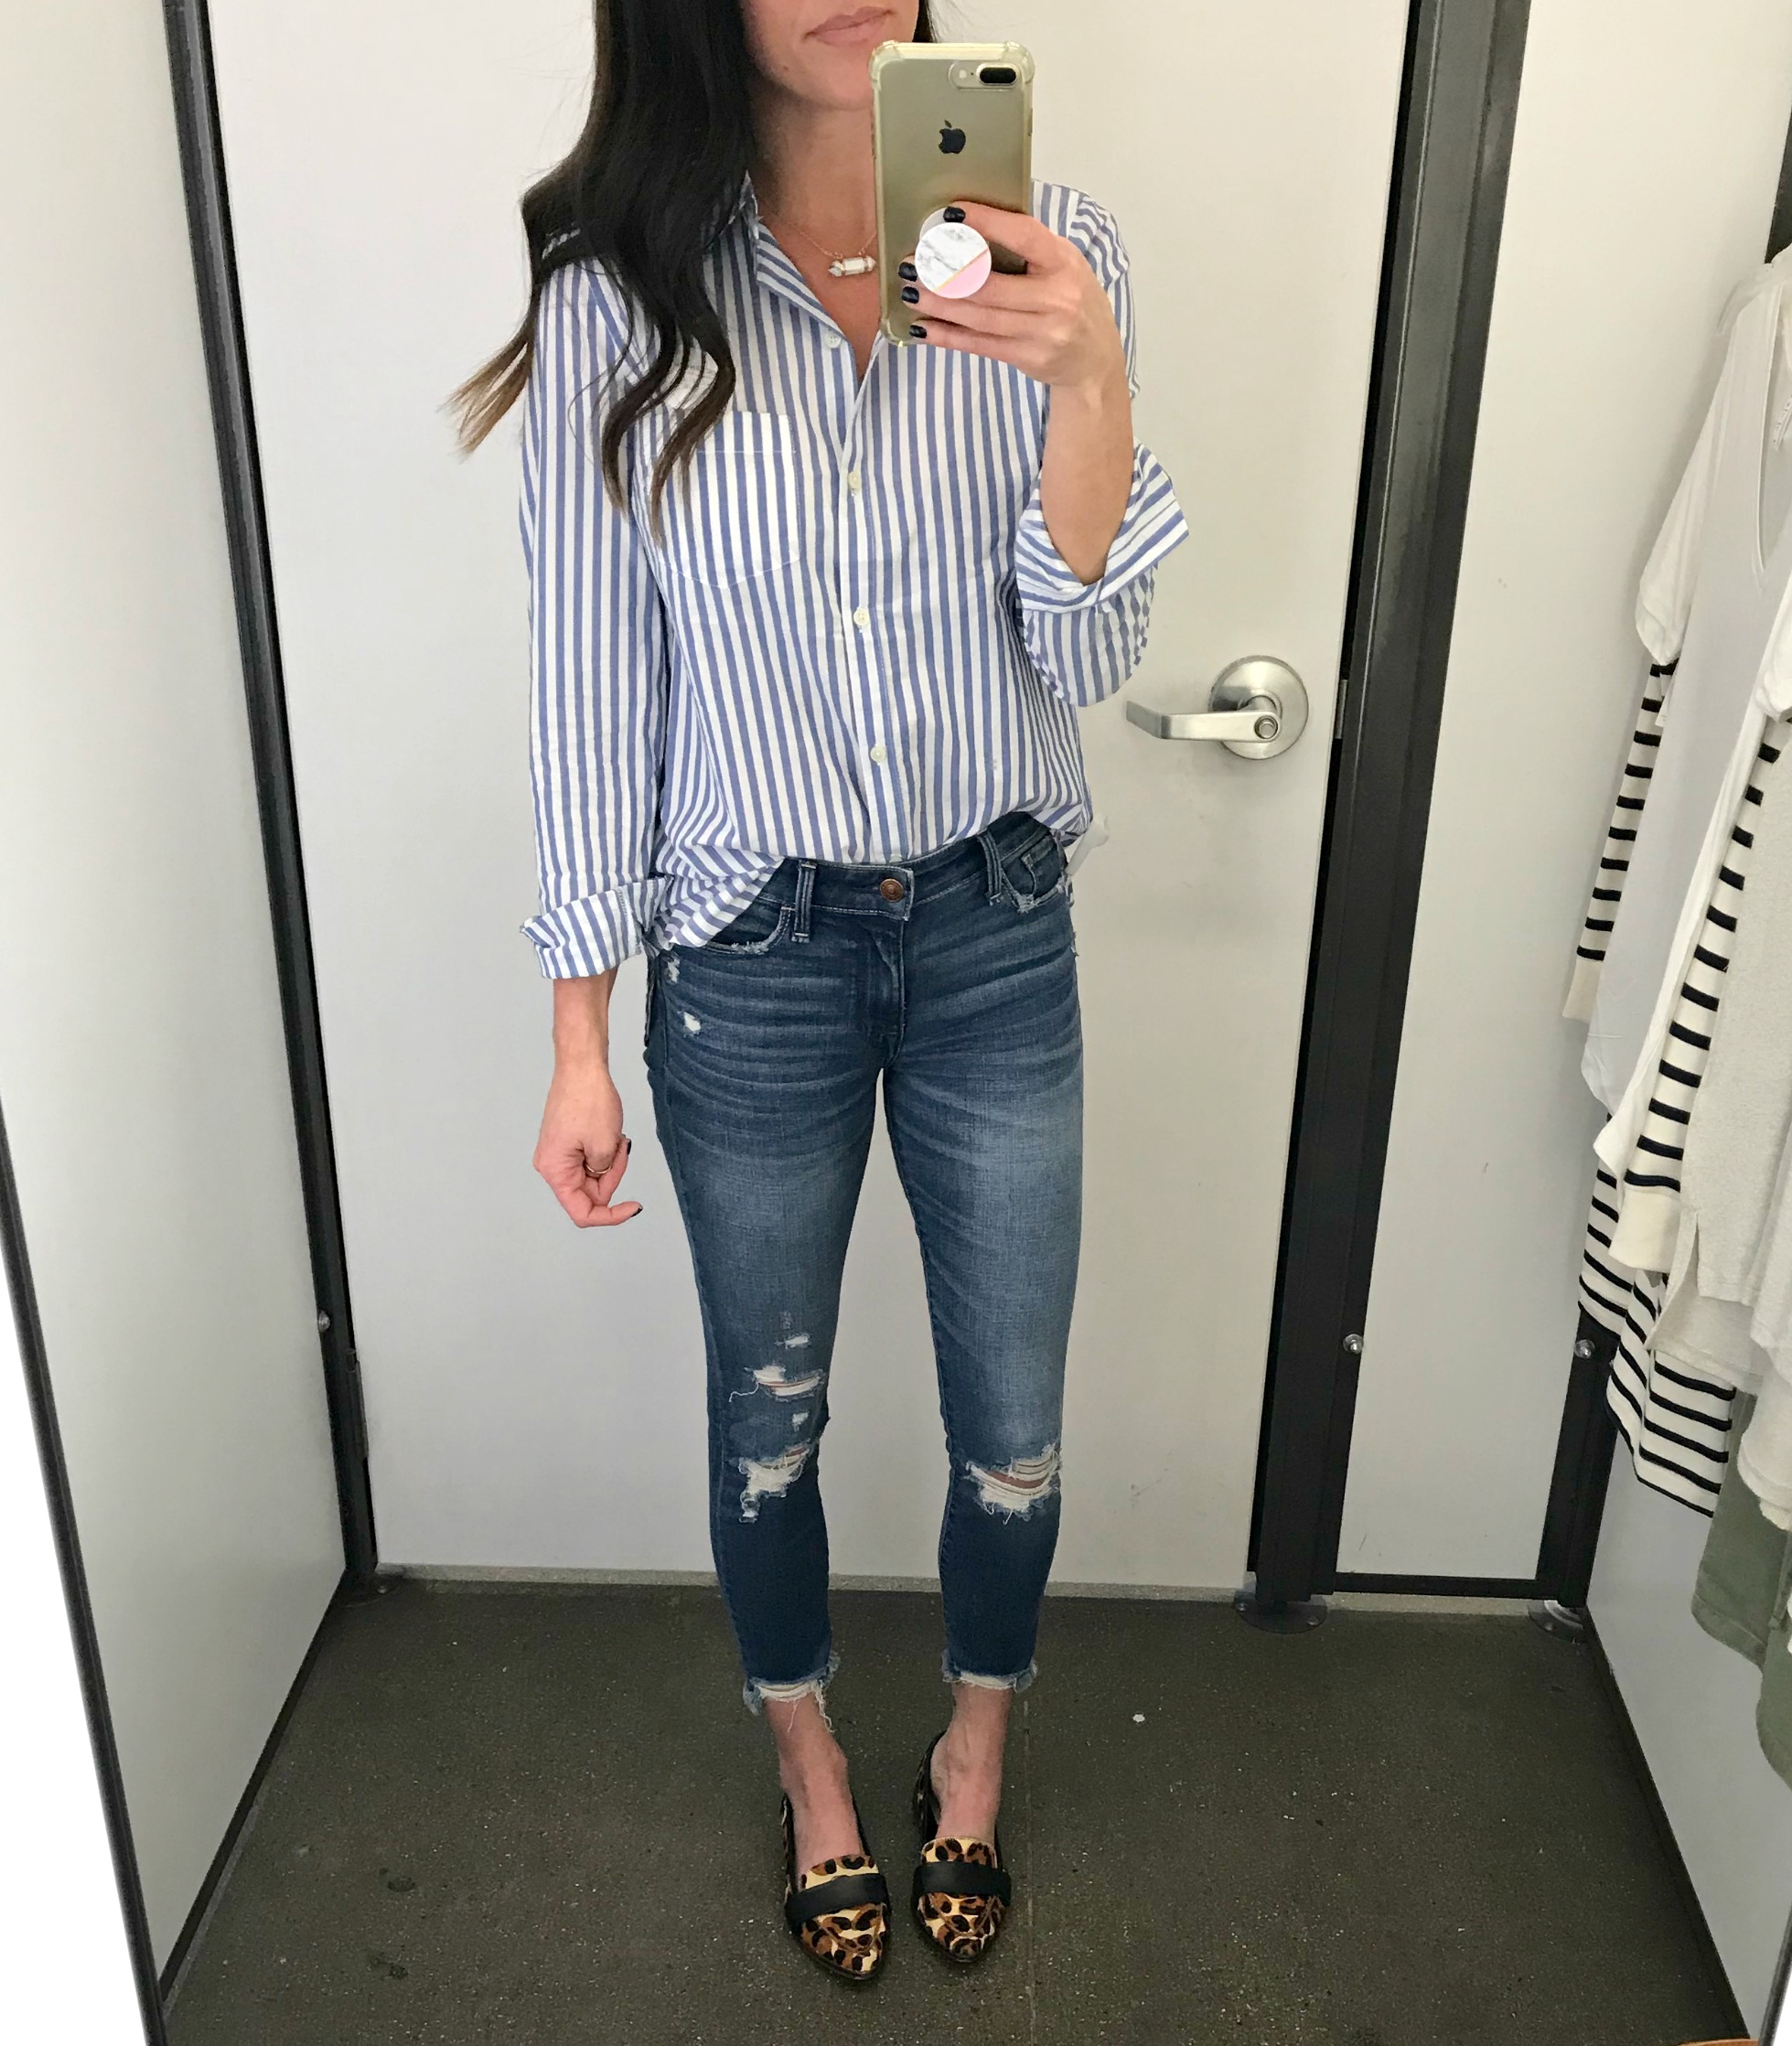 Old Navy PANTS  dressing room try on 